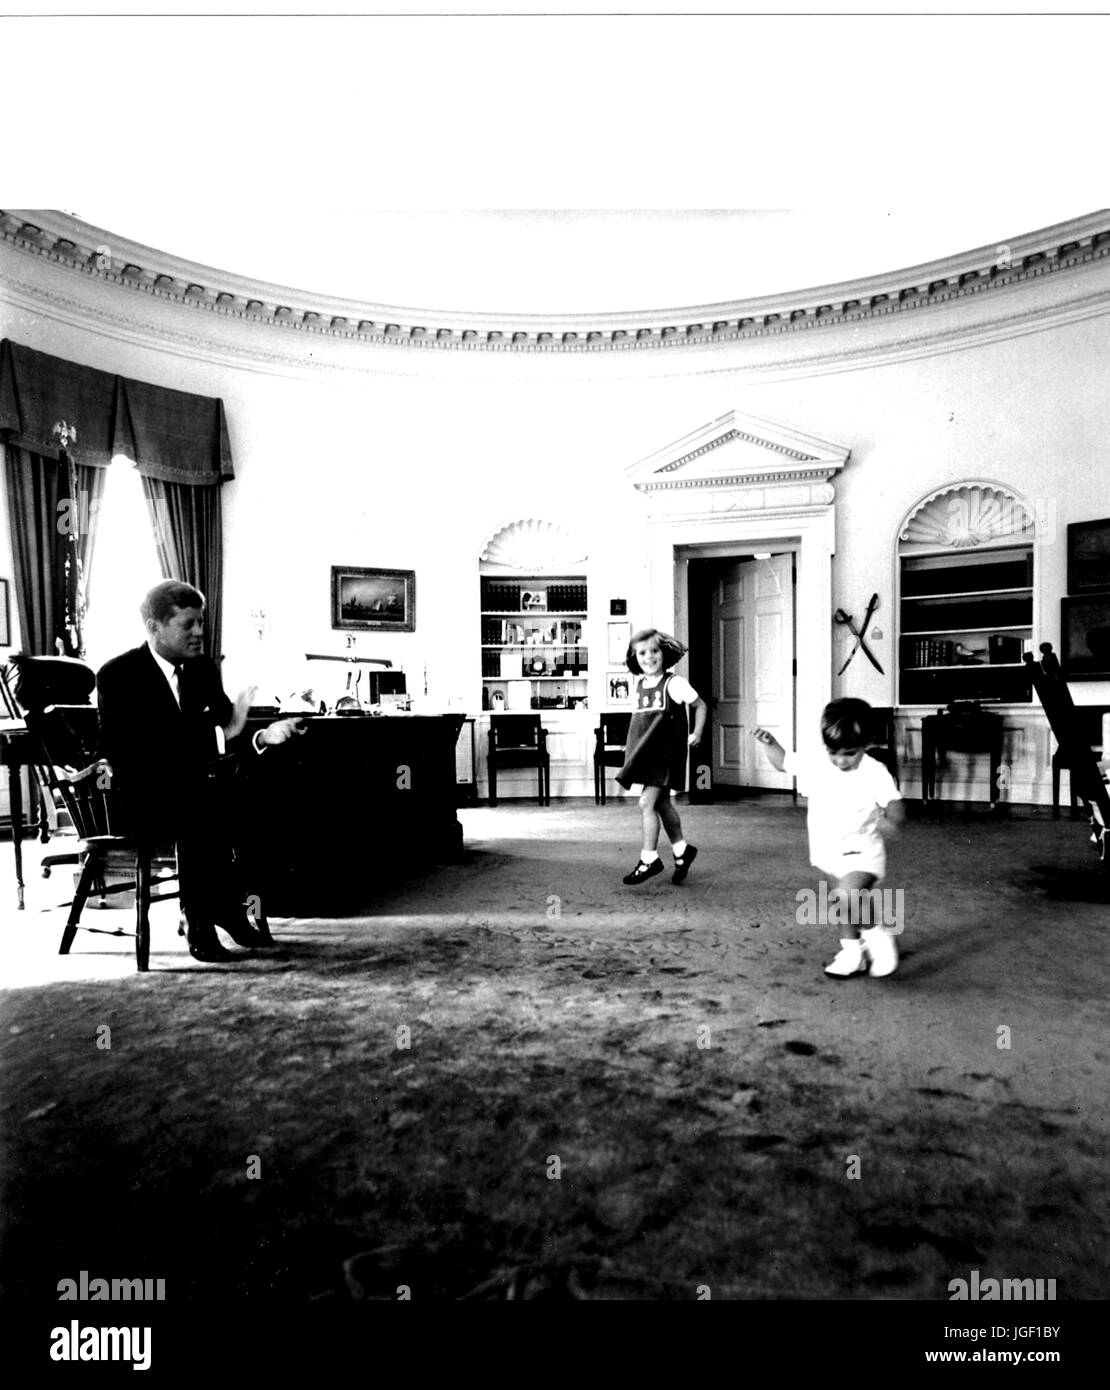 US President John F Kennedy works in the Oval Office of the White House while children John Kennedy Jr and Caroline Kennedy play, October 10, 1962. Photo by Cecil Stoughton. Stock Photo